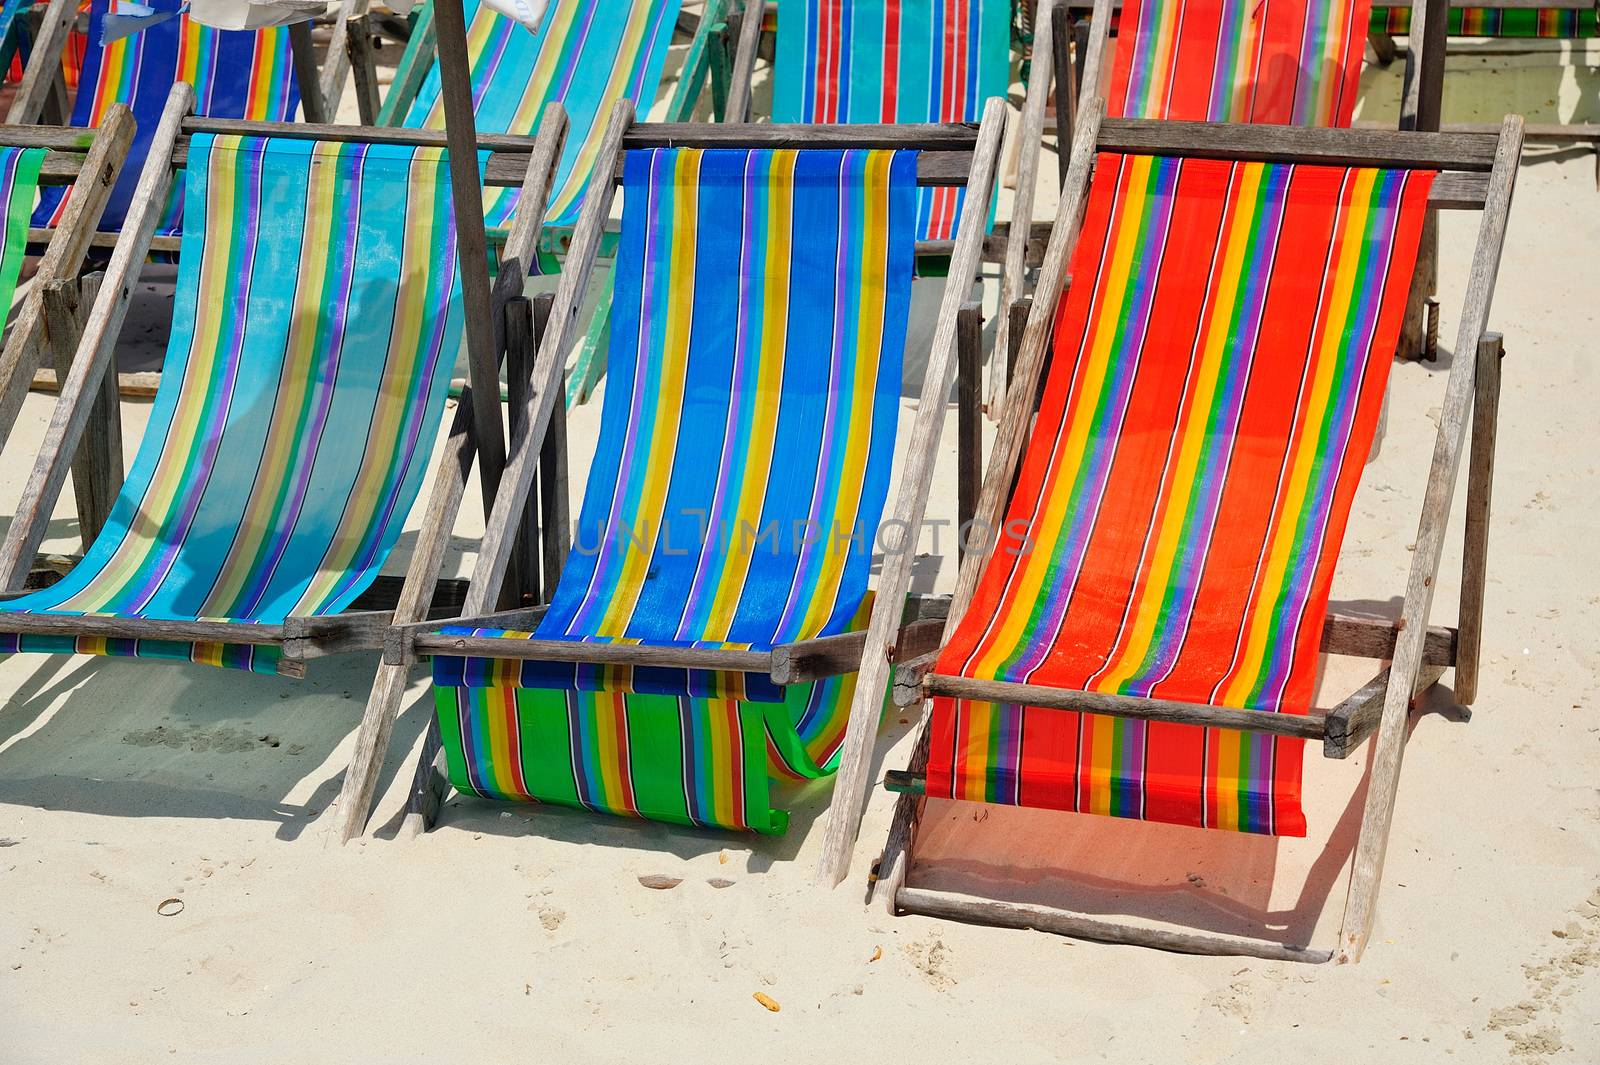 colorful of Deck Chairs on the Beach in Sunny Day ,Pattaya Thailand.